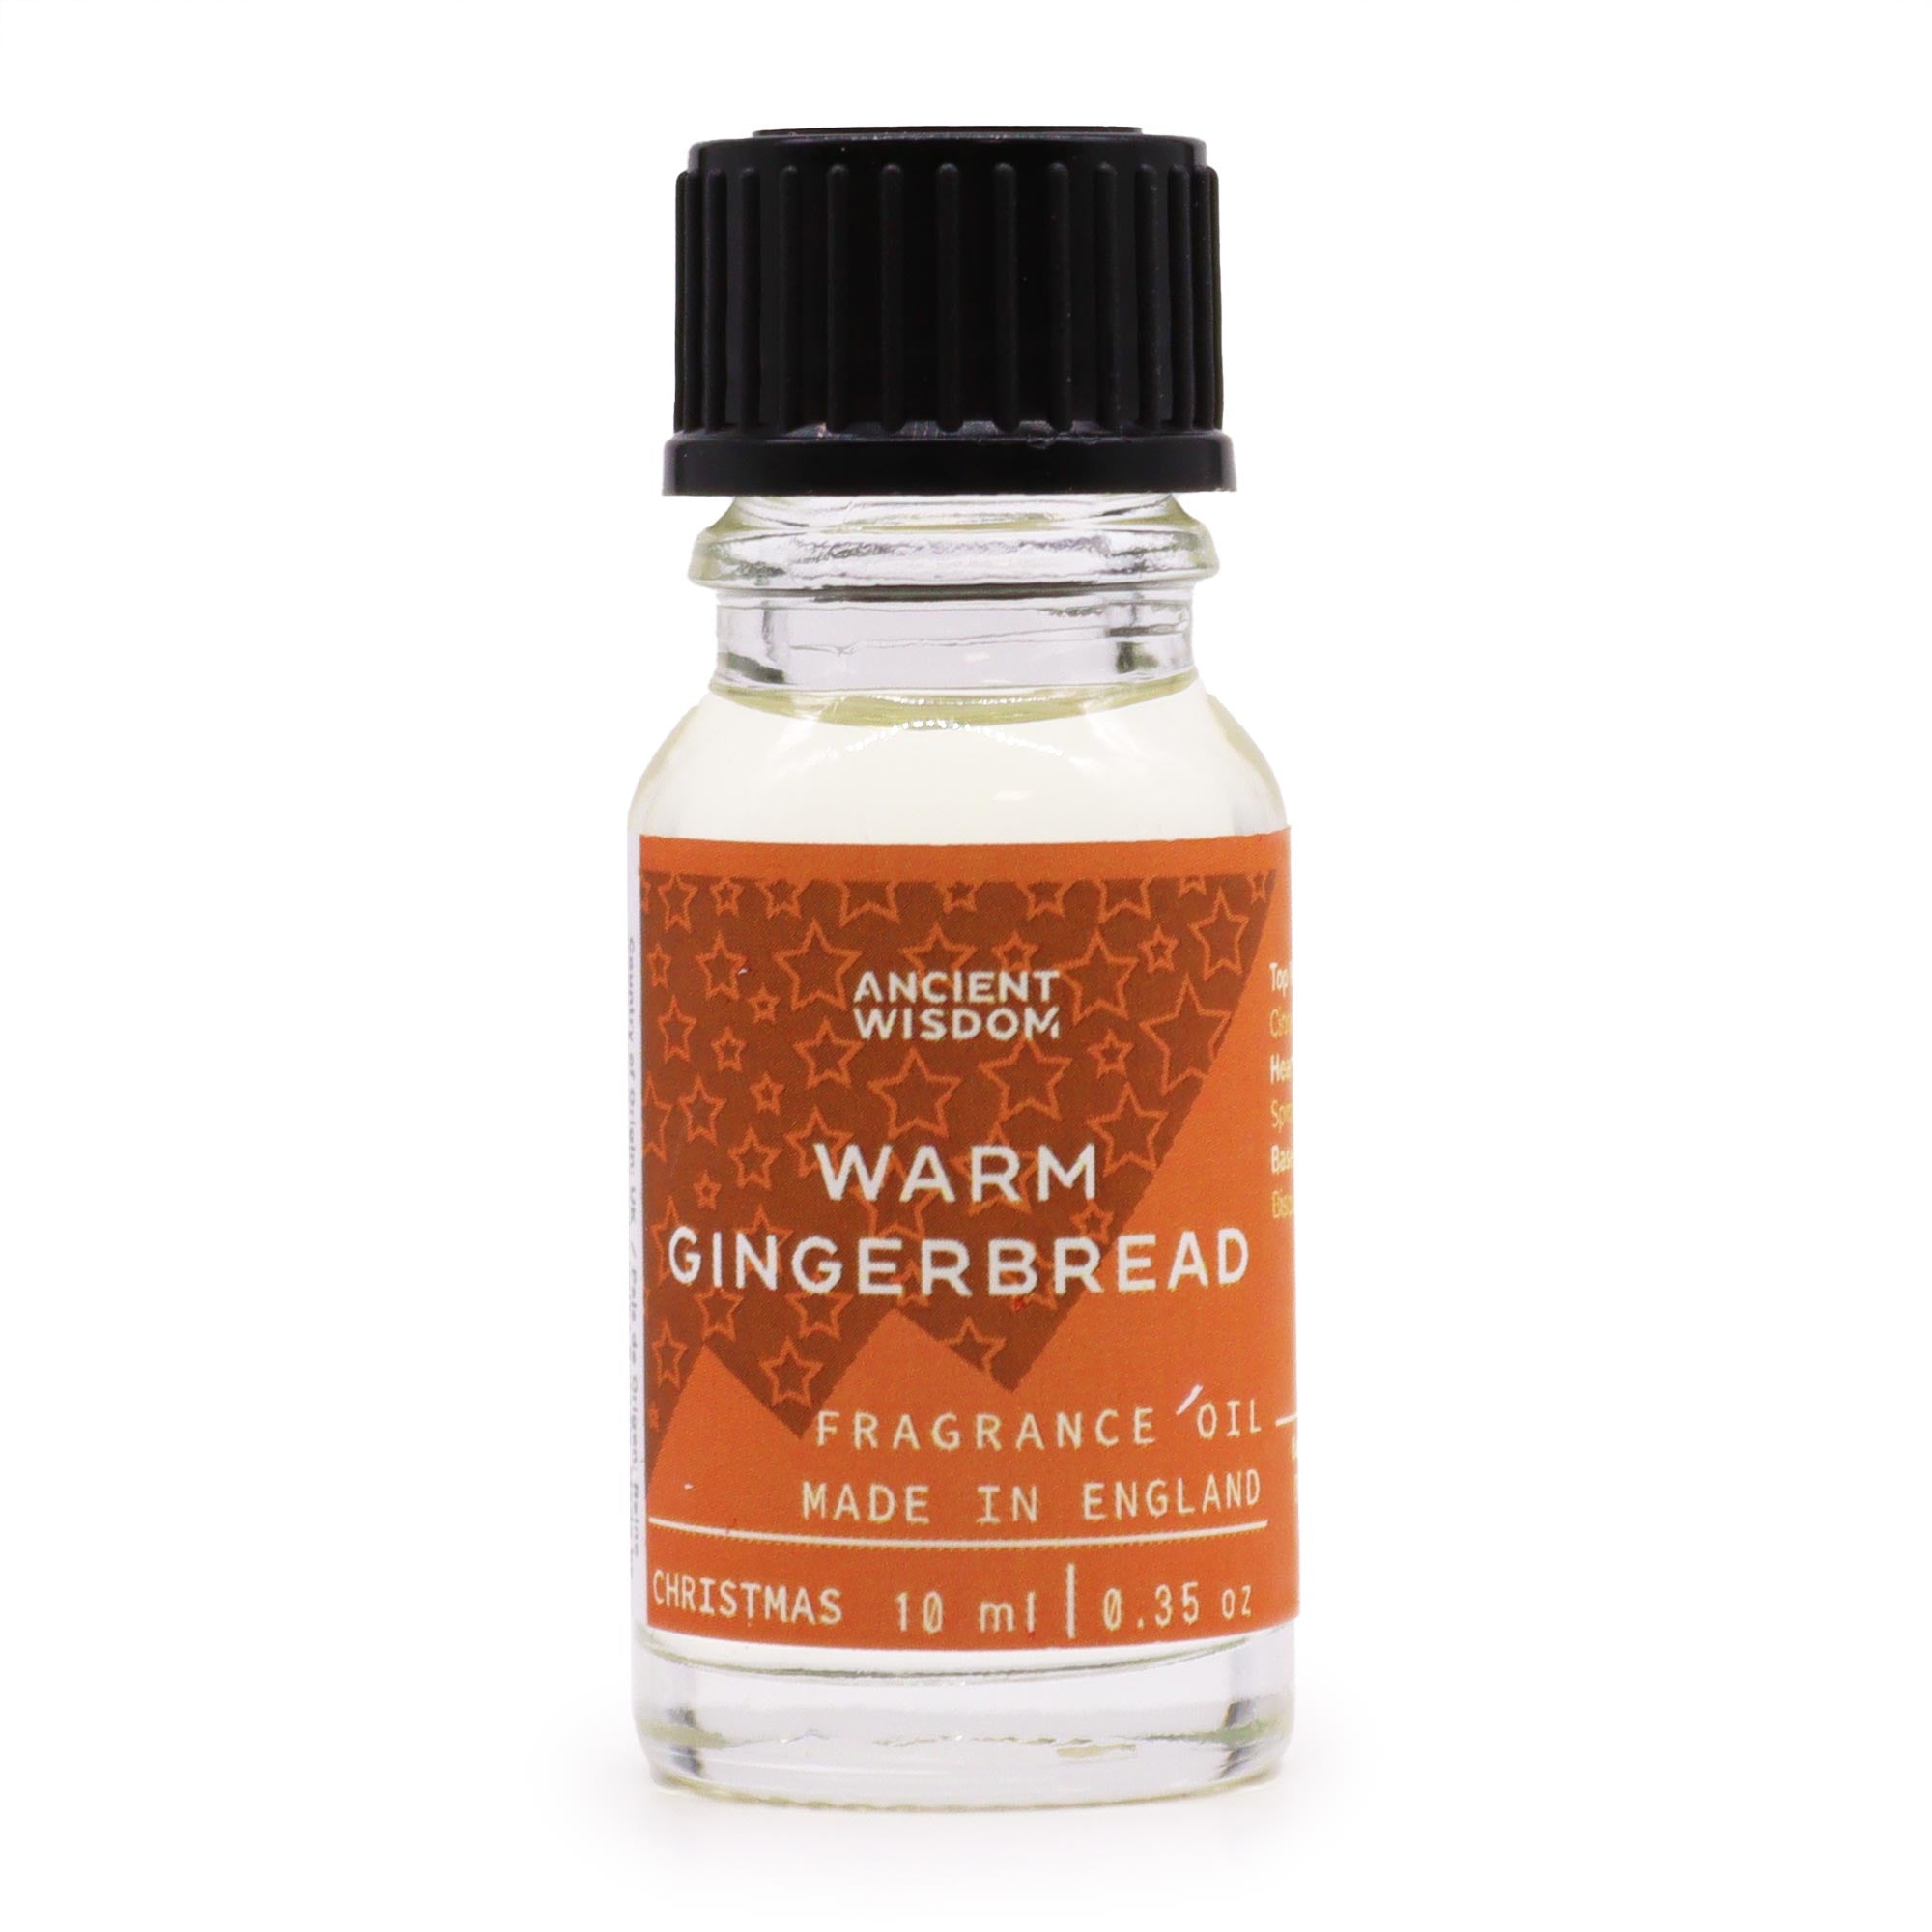 View Warm Gingerbread Fragrance Oil 10ml information